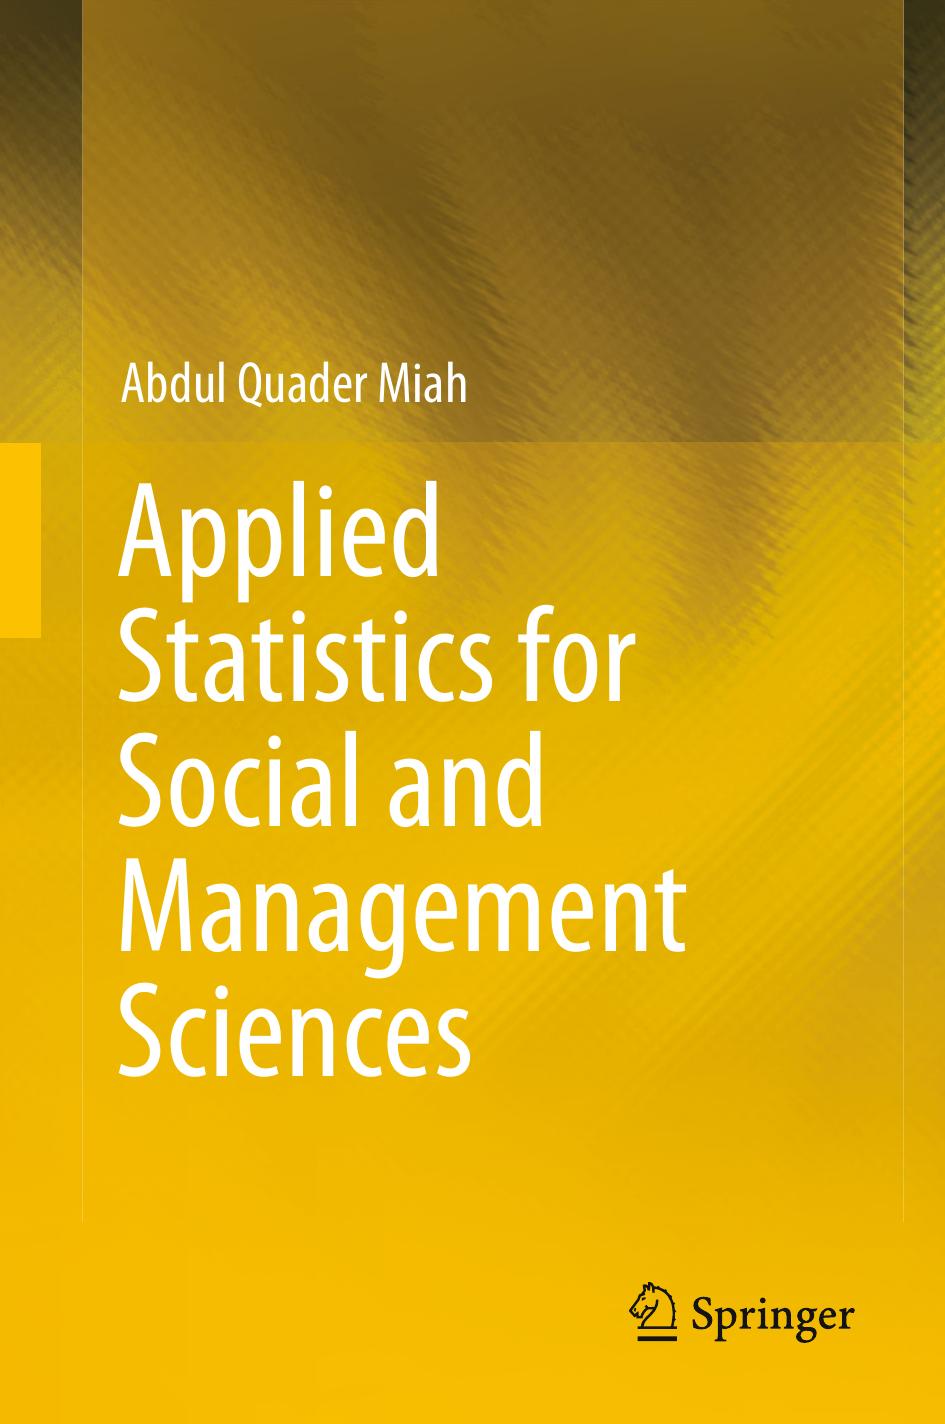 Applied statistics for social and management sciences 2016